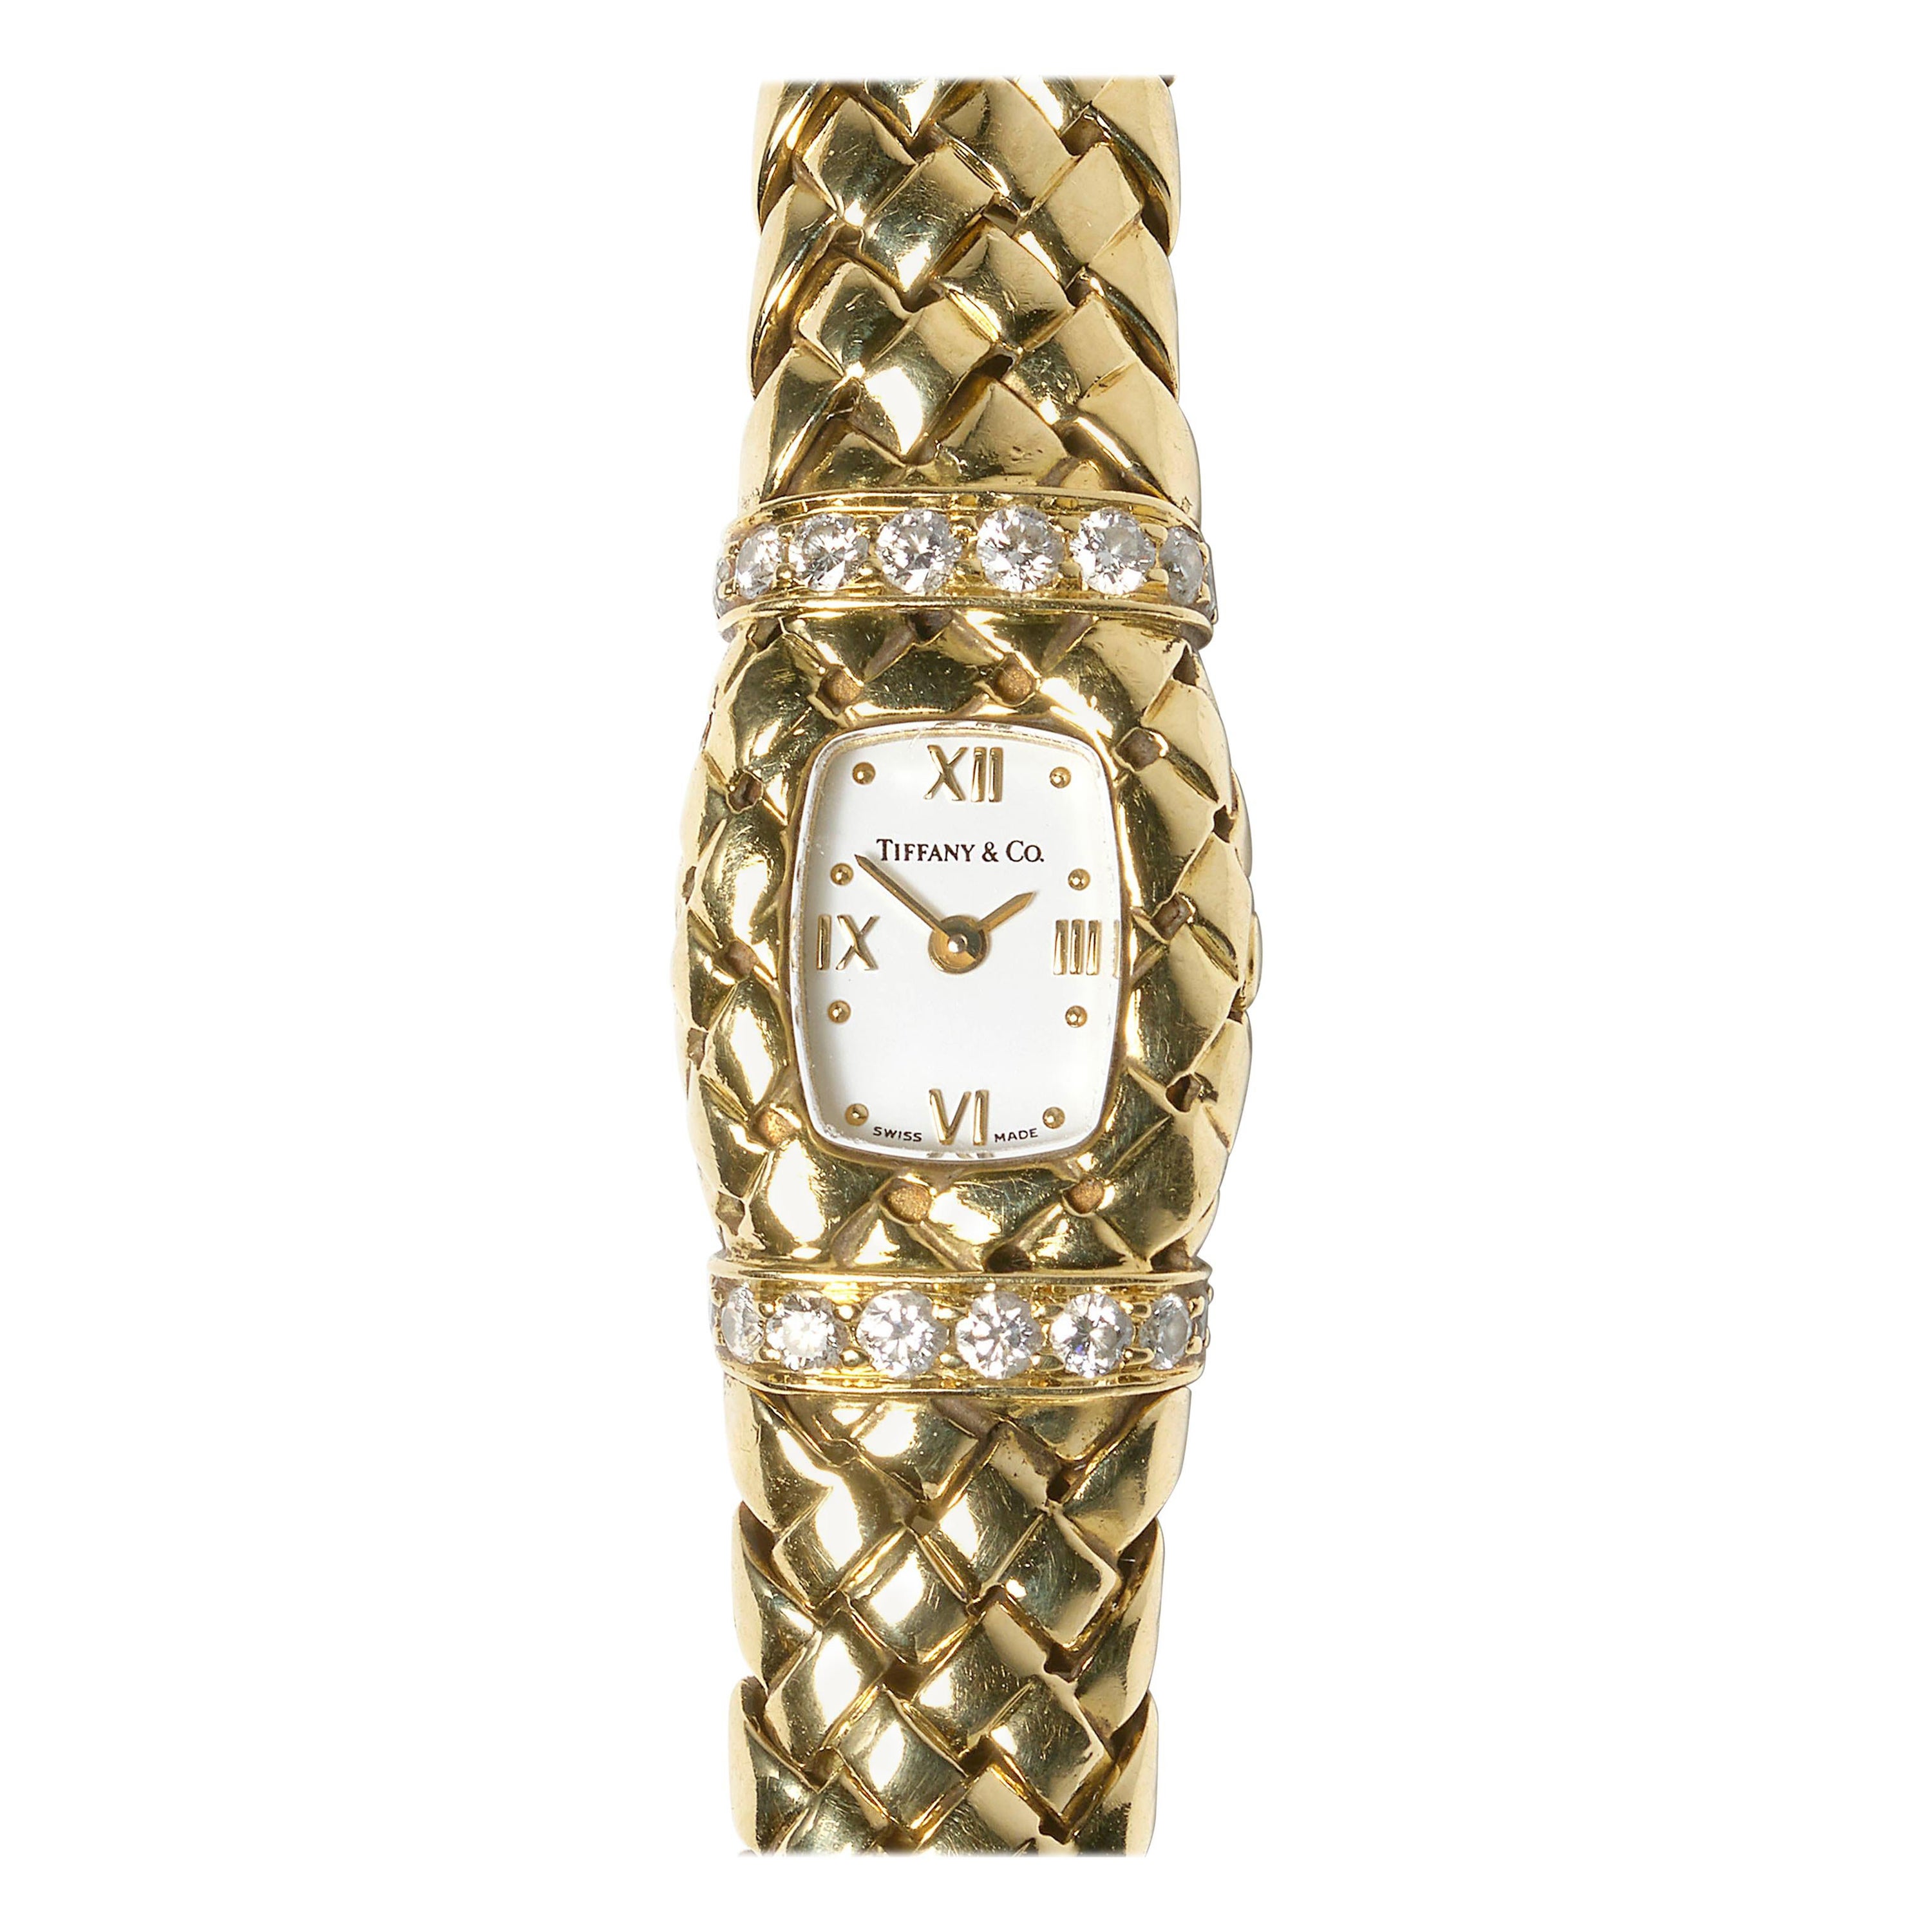 Tiffany & Co. Diamond and Gold "Vannerie" Wristwatch